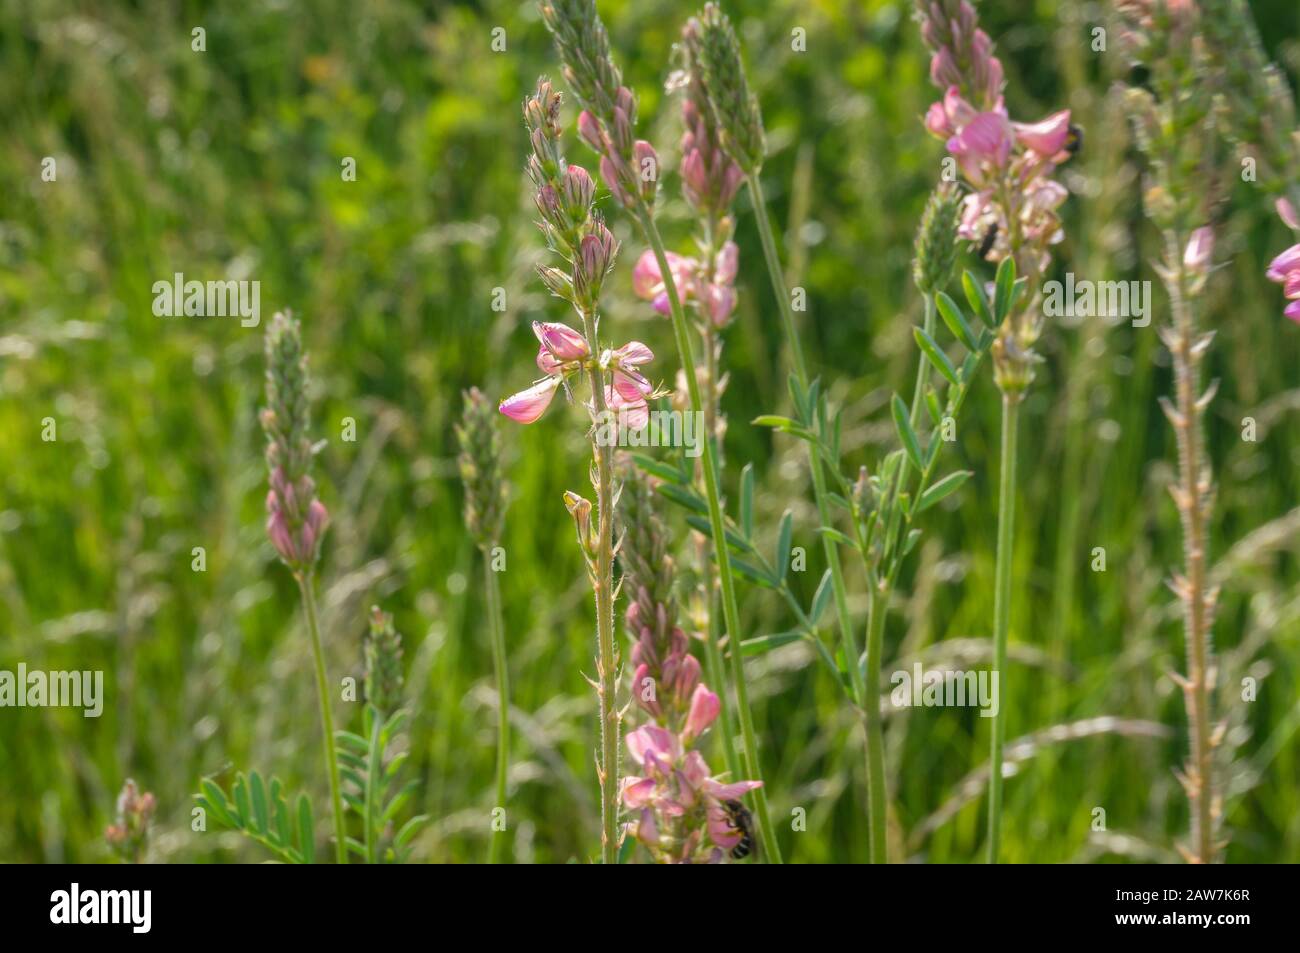 Close up of sweet pea plant blooming with pink flowers. Floral nature background Stock Photo